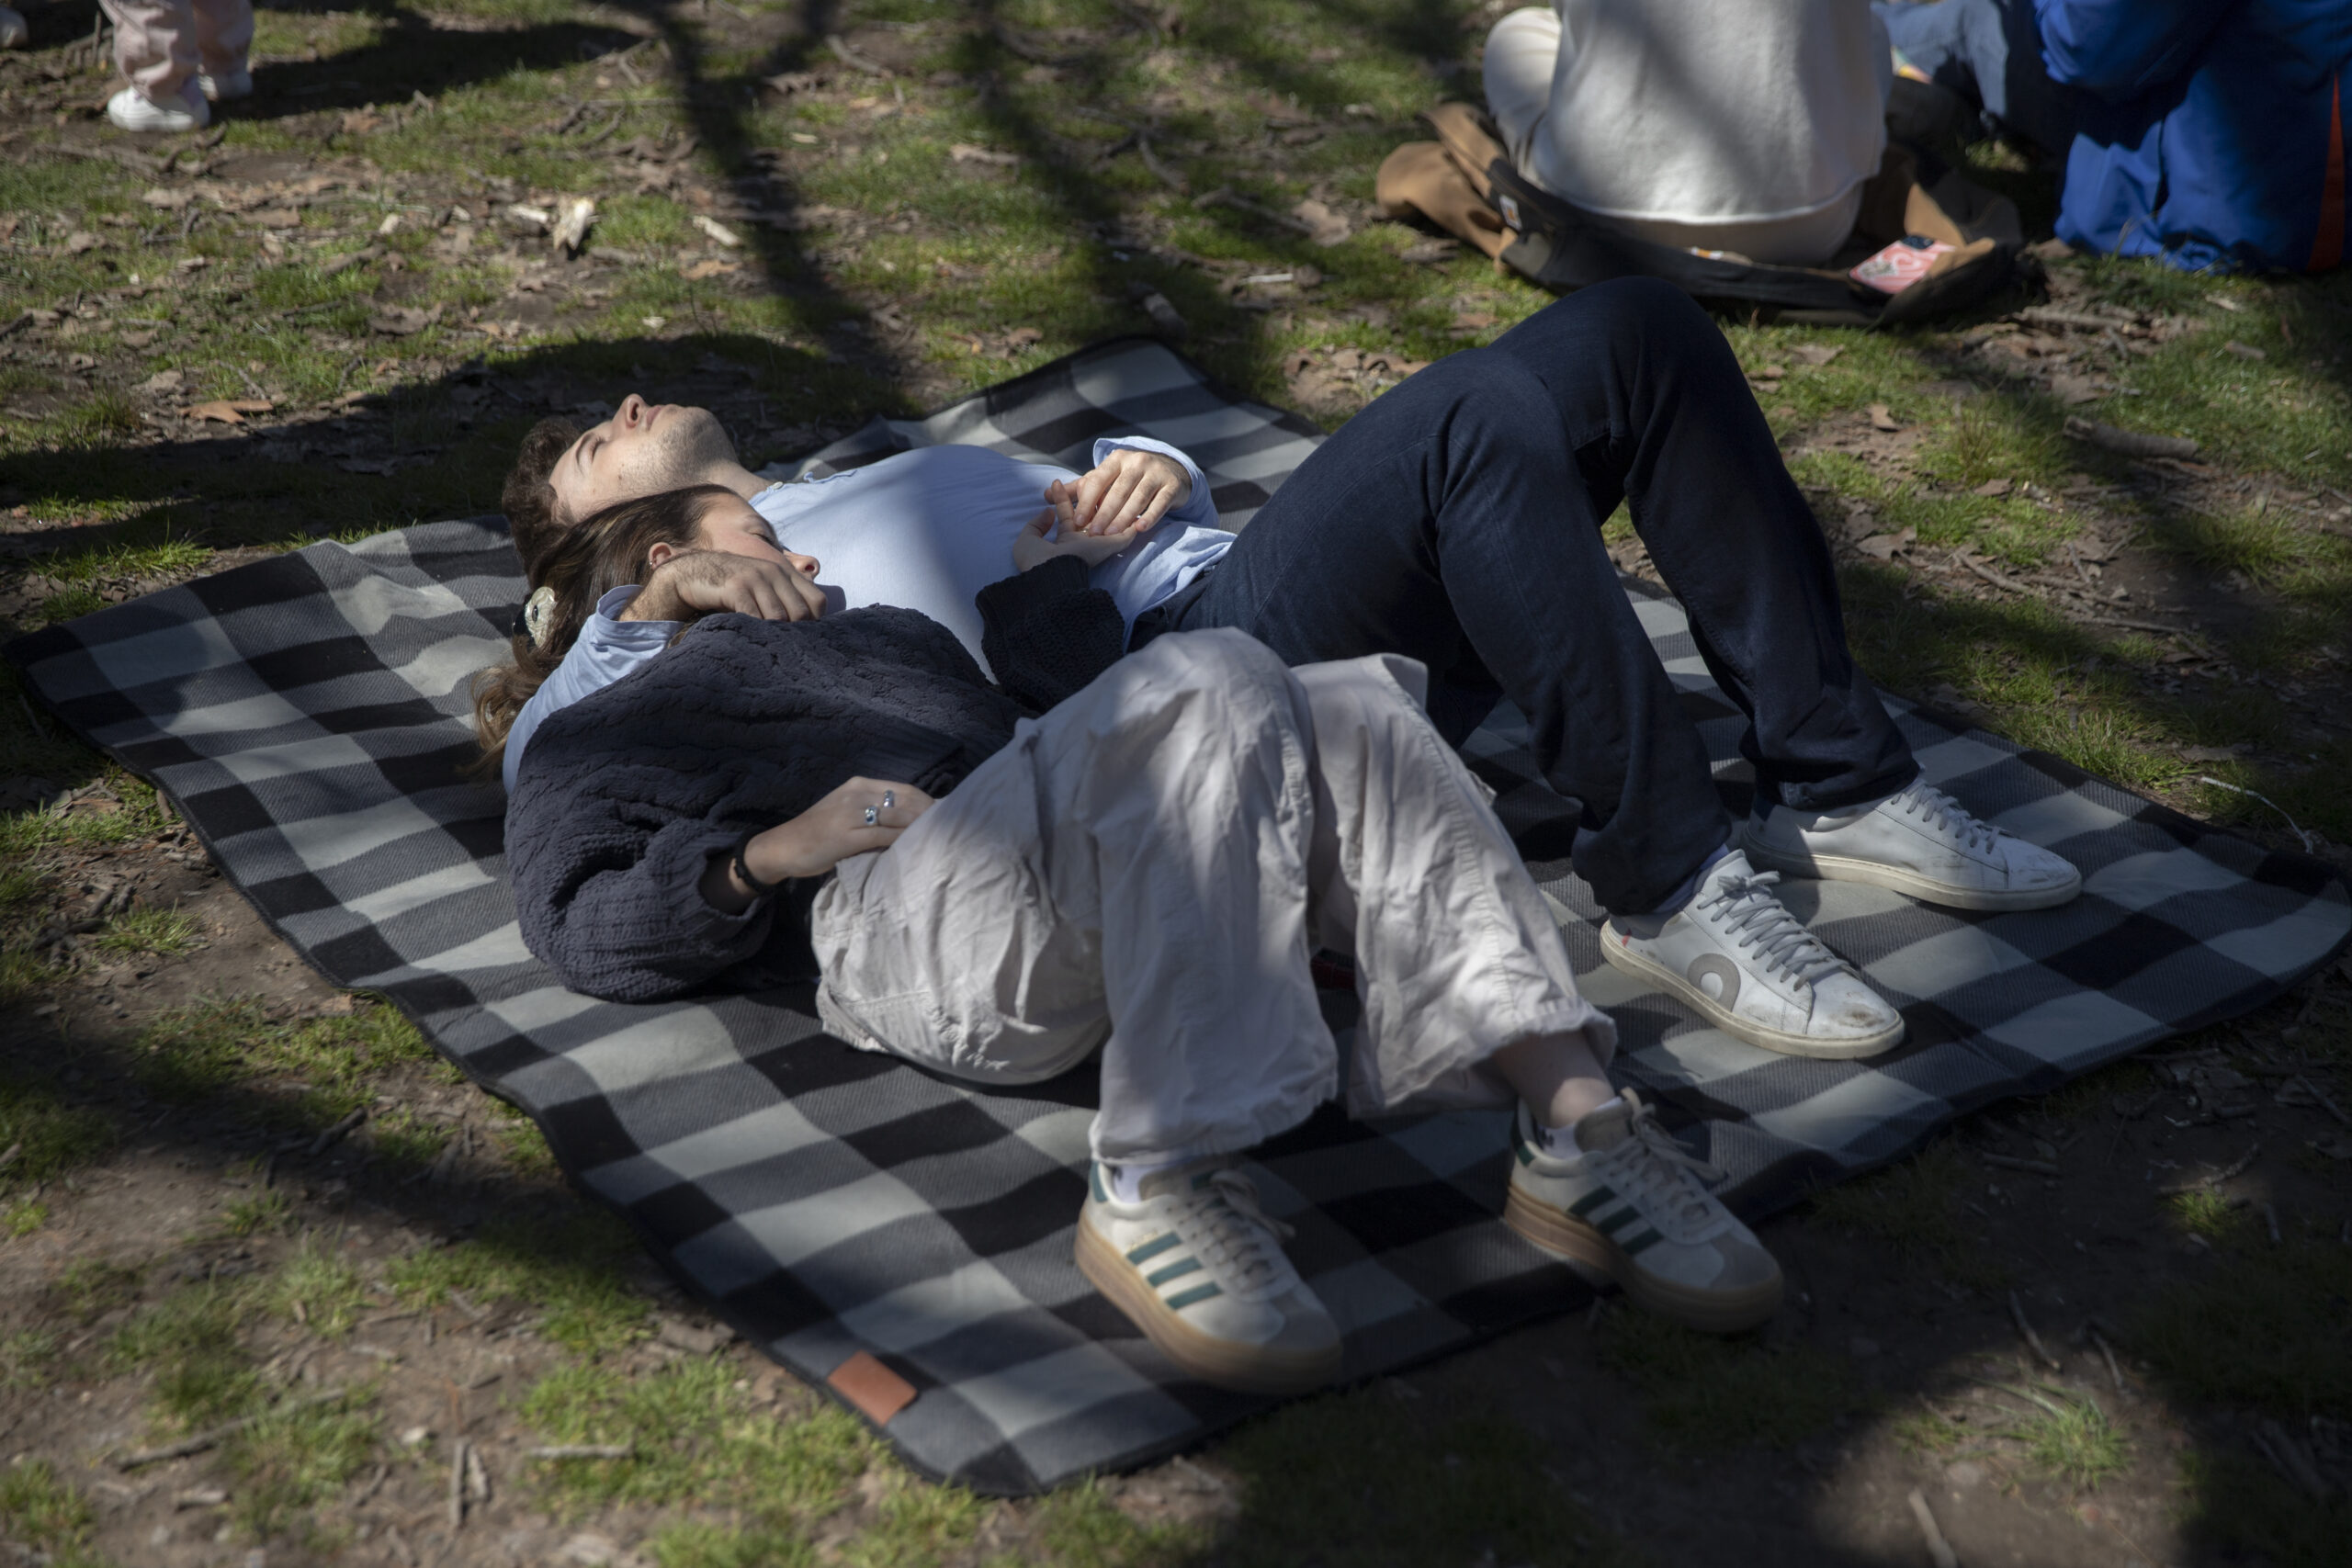 A young couple has eaten too much at Prospect Park Smorgasburg.